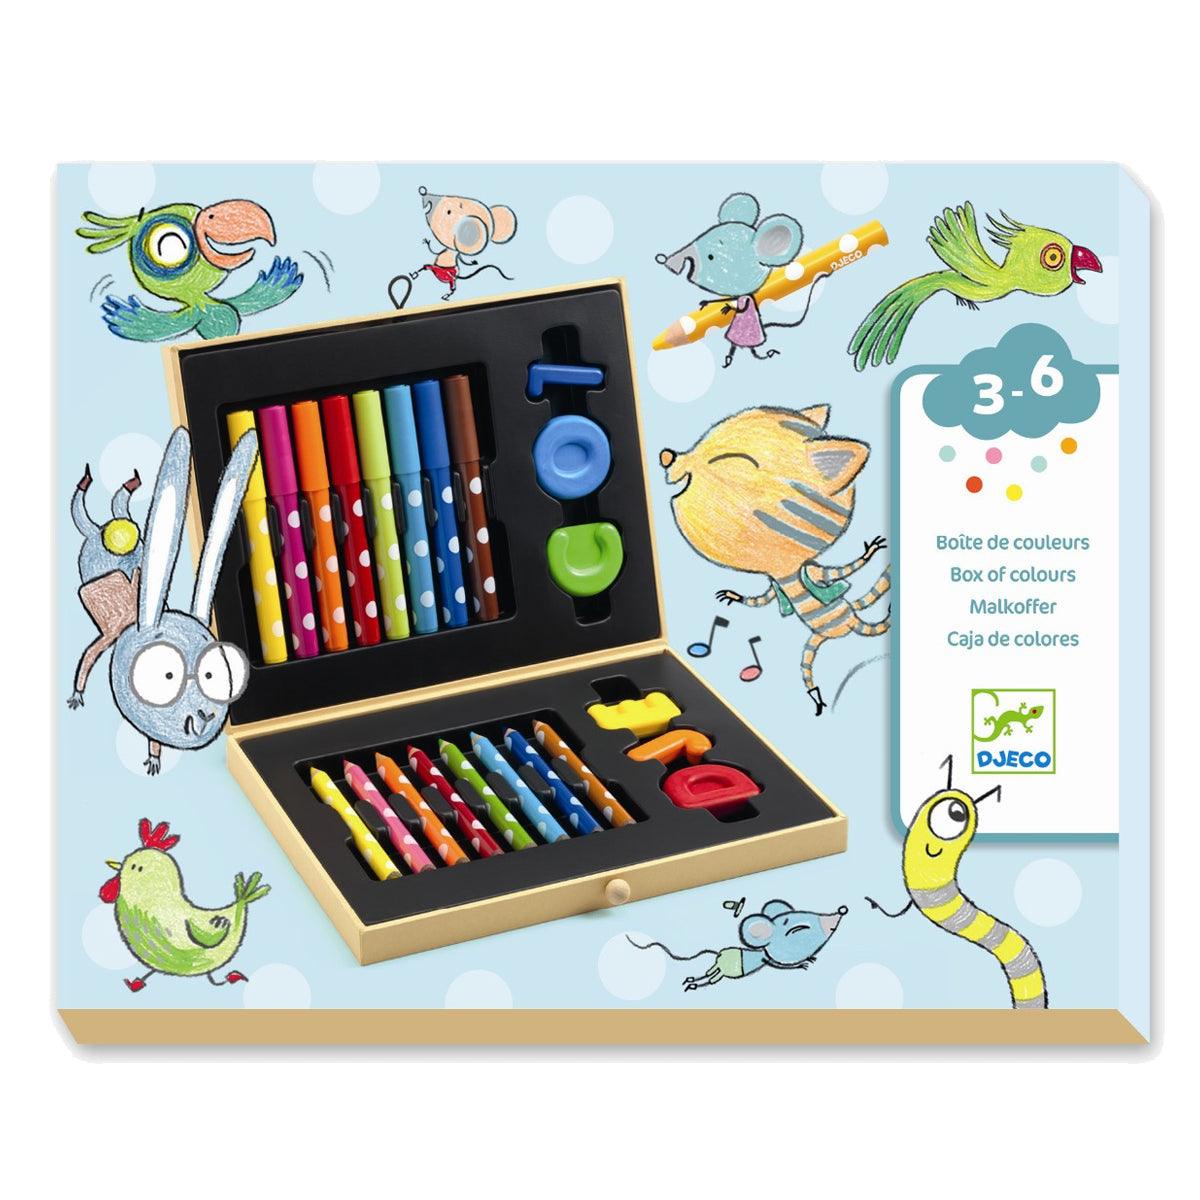 Djeco: Box of Colours for Toddlers art set for toddlers